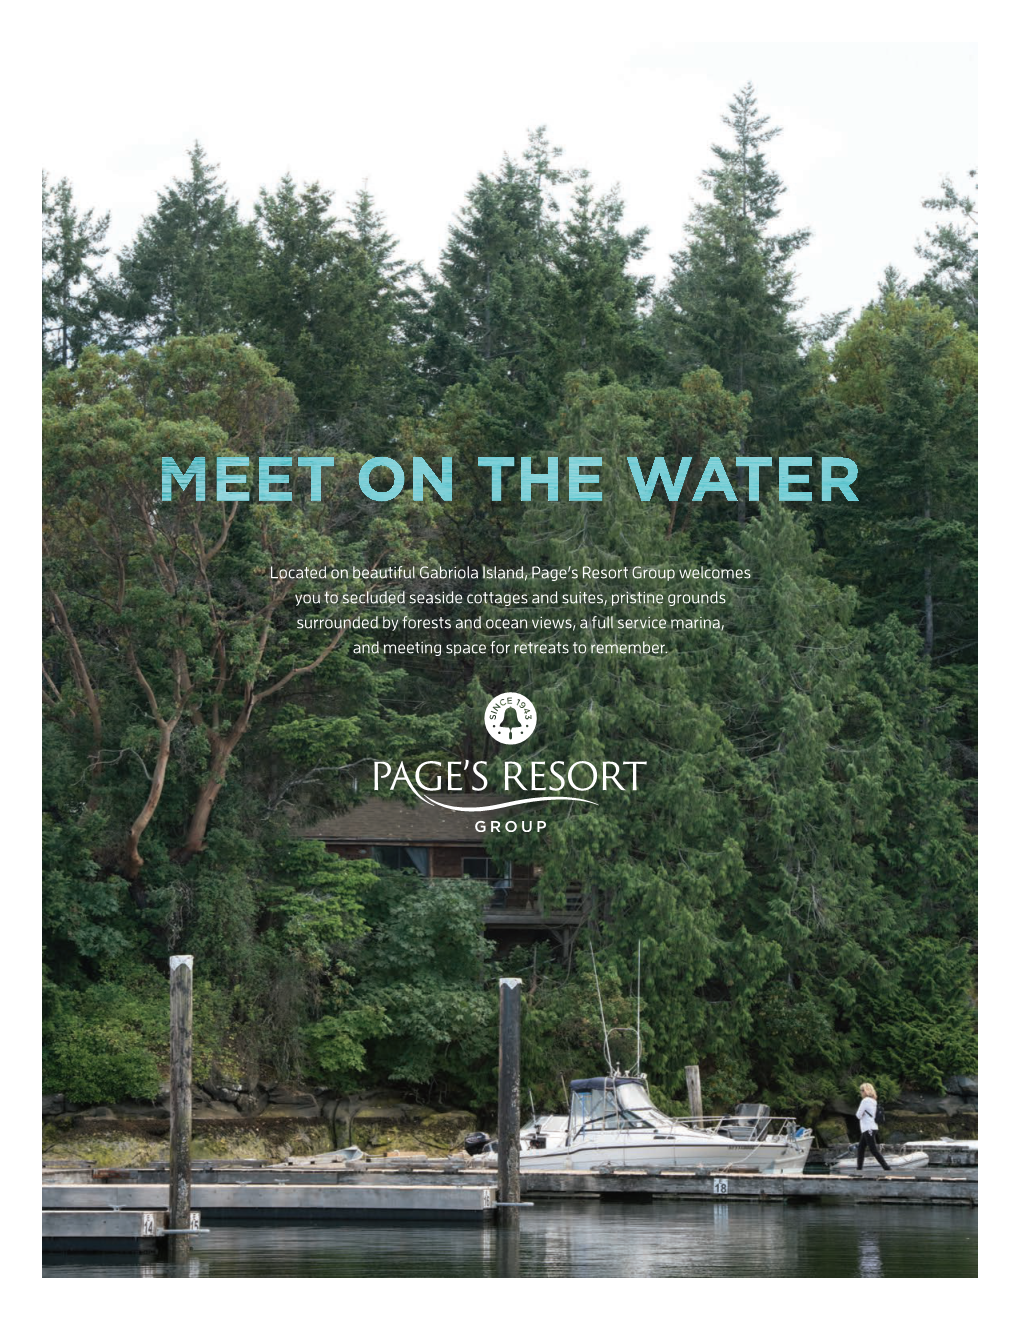 Located on Beautiful Gabriola Island, Page's Resort Group Welcomes You